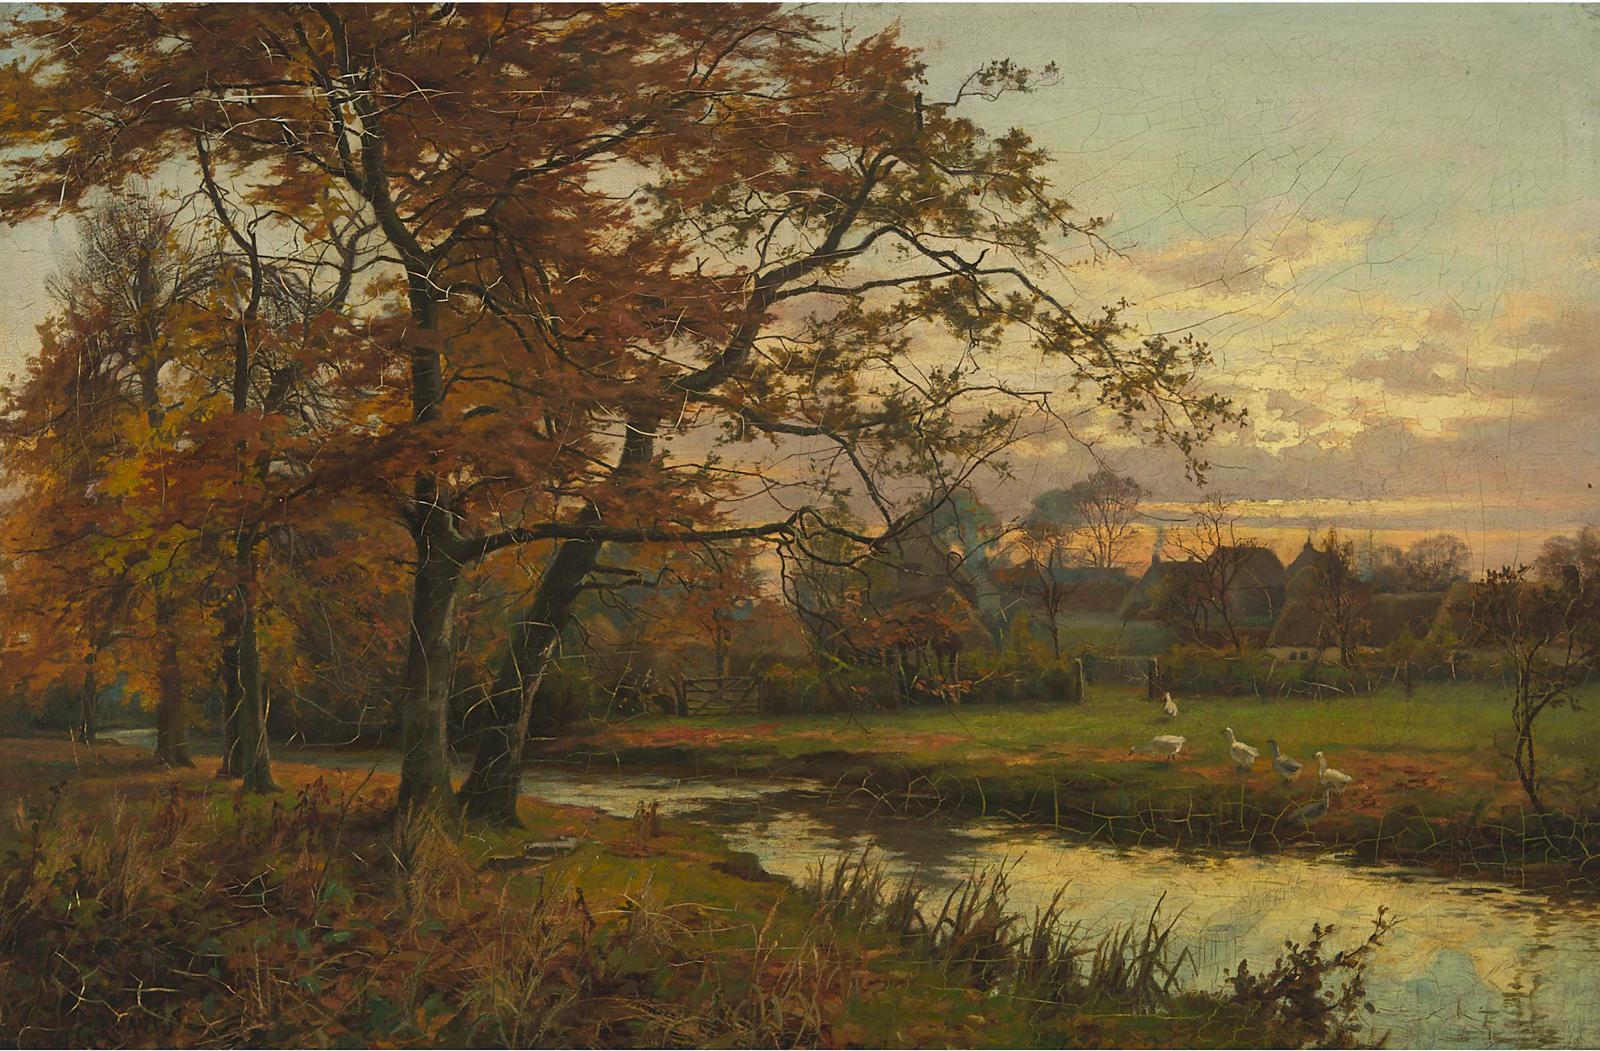 William Greaves (1852-1938) - Wooded Landscape With Ducks Feeding By A River, 1890